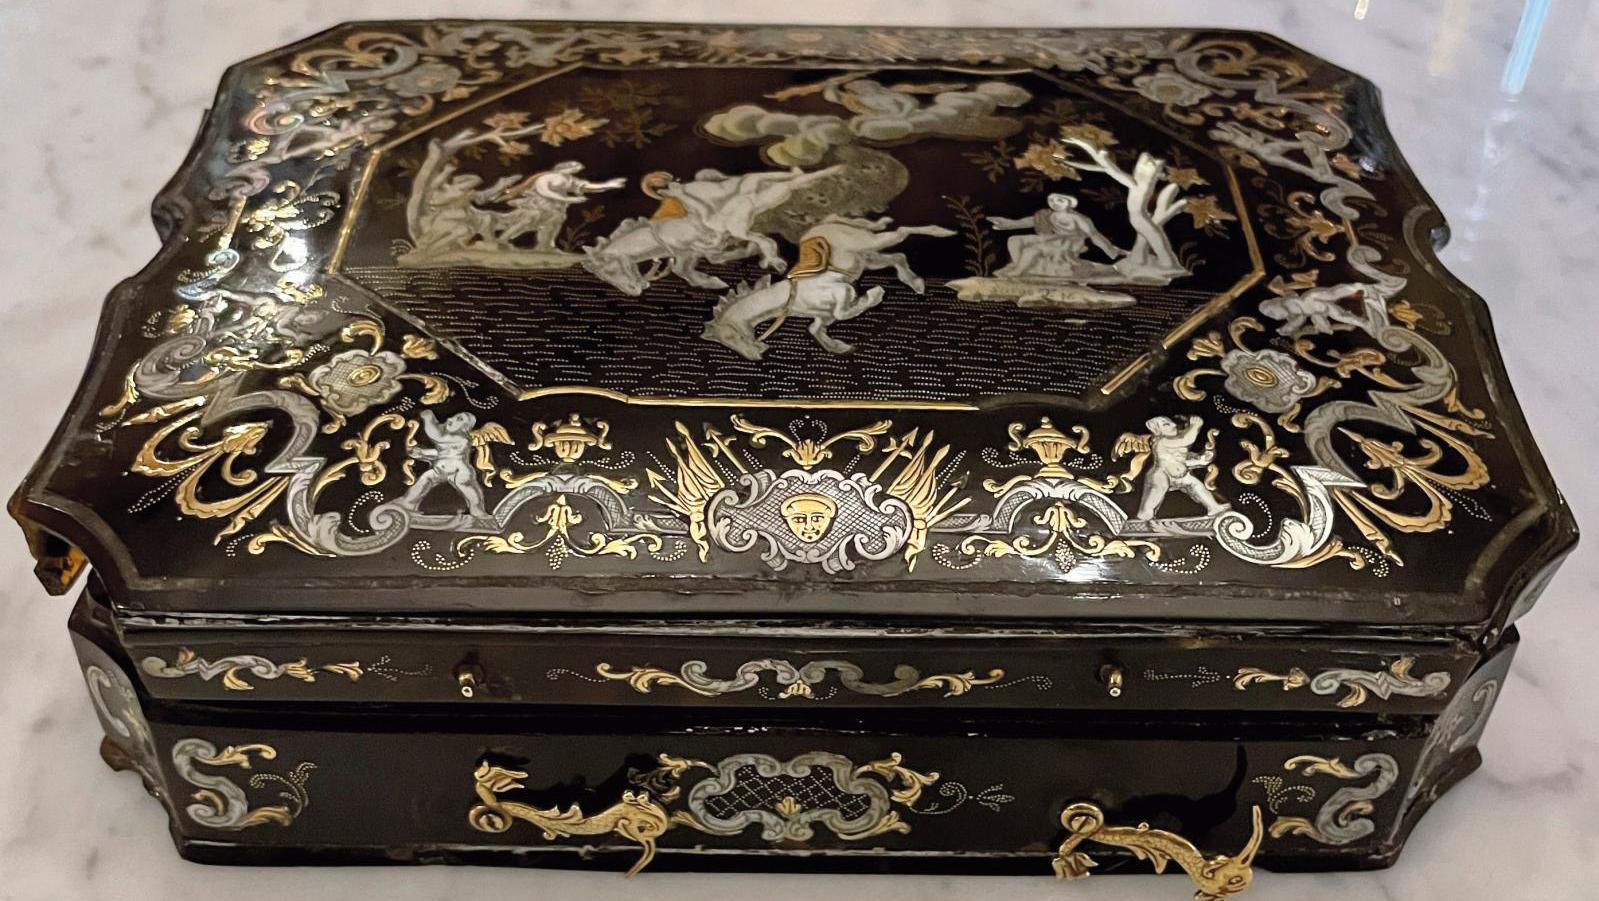 Naples, Sarao workshop, mid-18th century, gold piqué tortoiseshell box with mother-of-pearl... A Neapolitan Box Piques Keen Interest